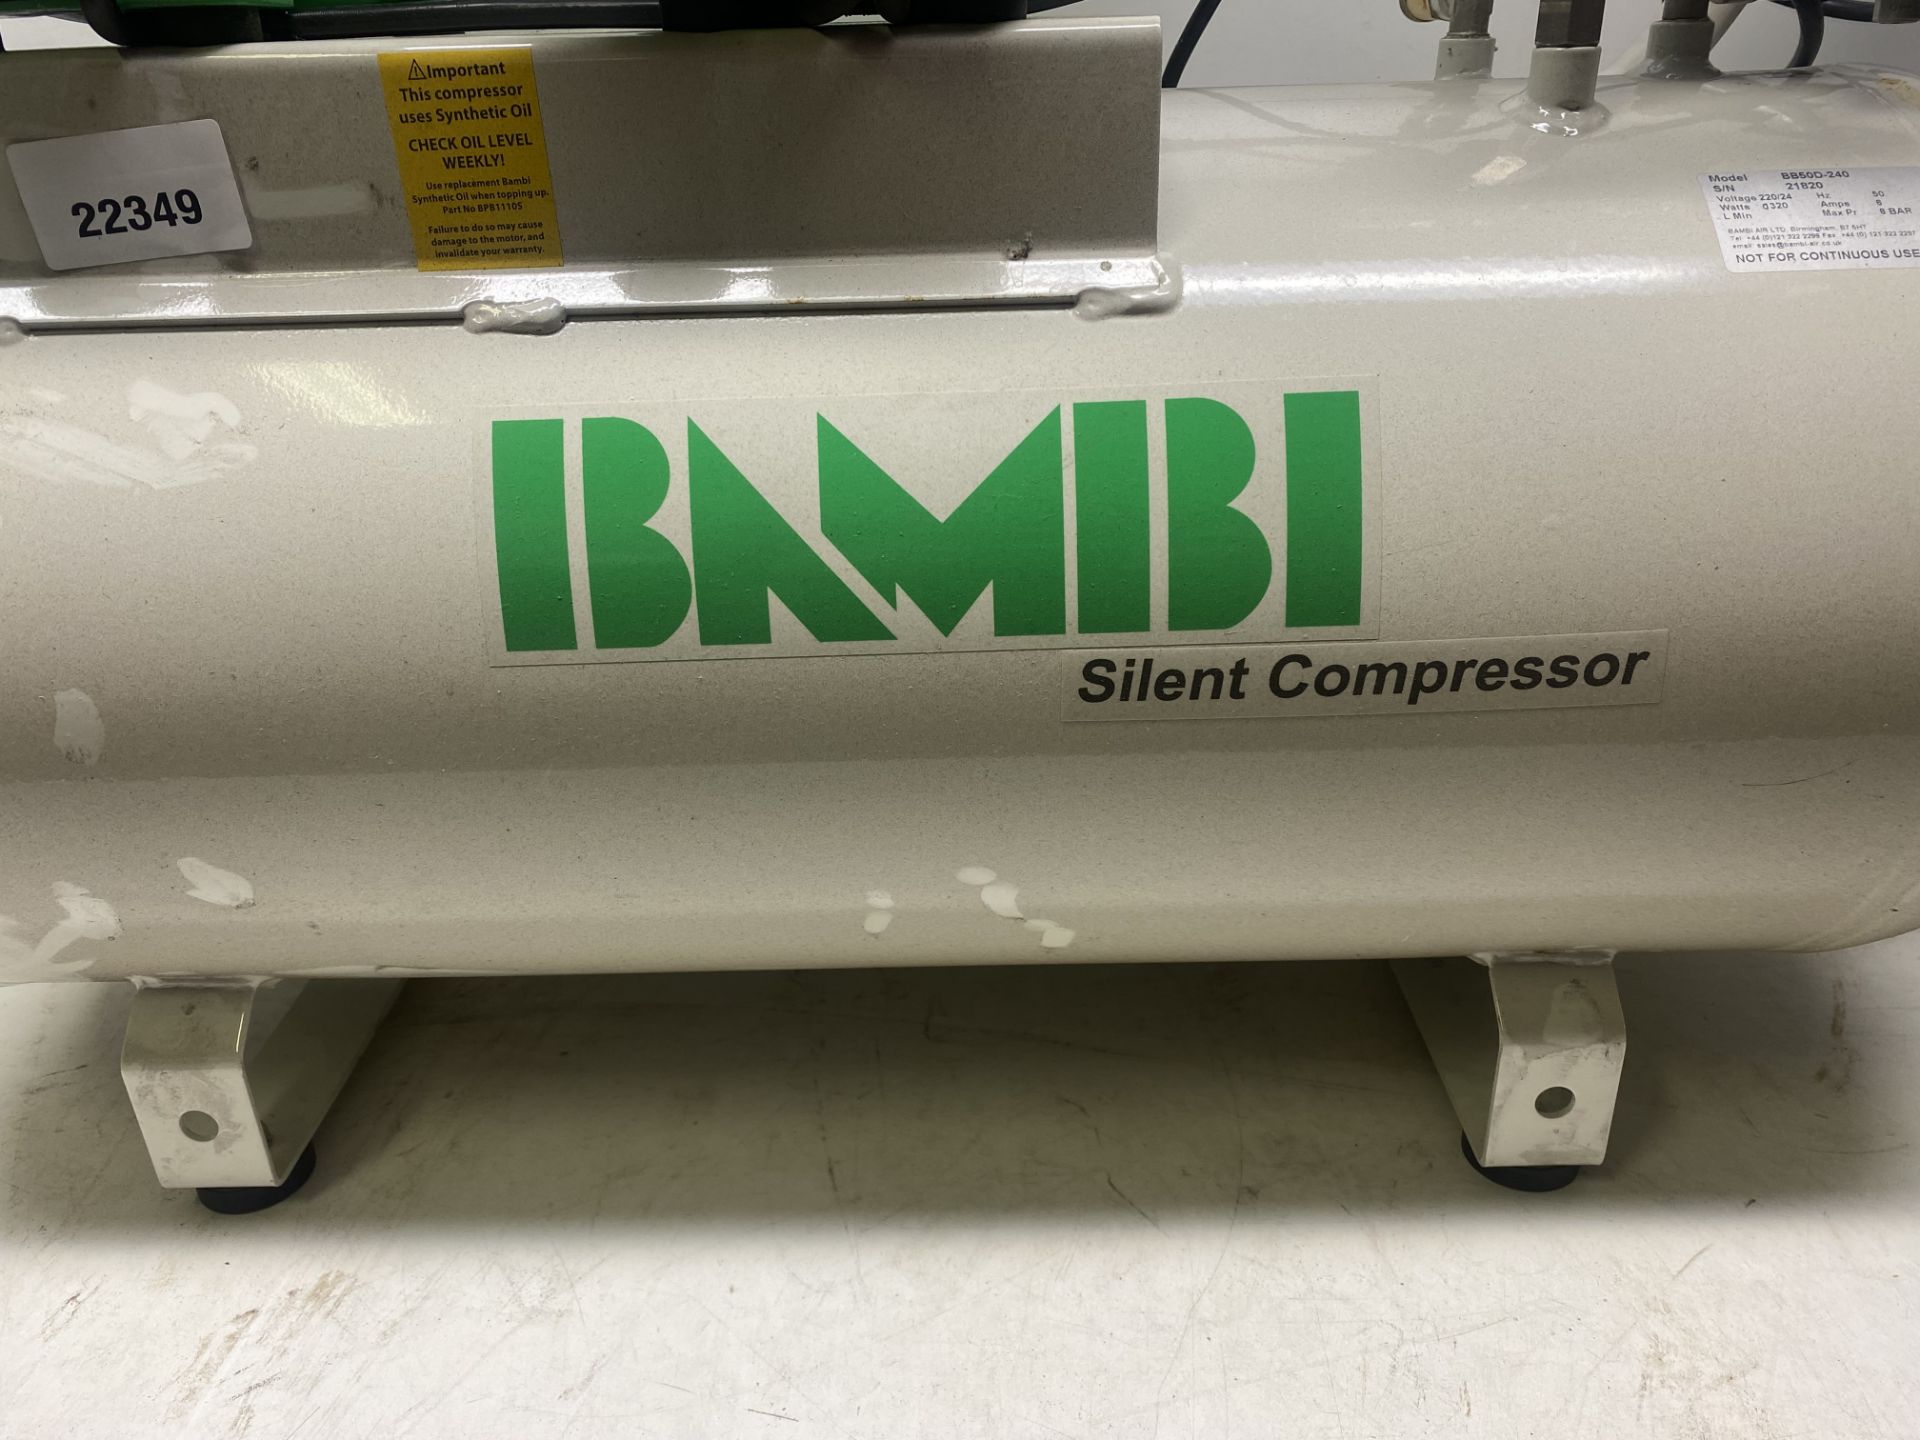 Bambi BB50D-240 Silent Air Compressor - Image 2 of 10